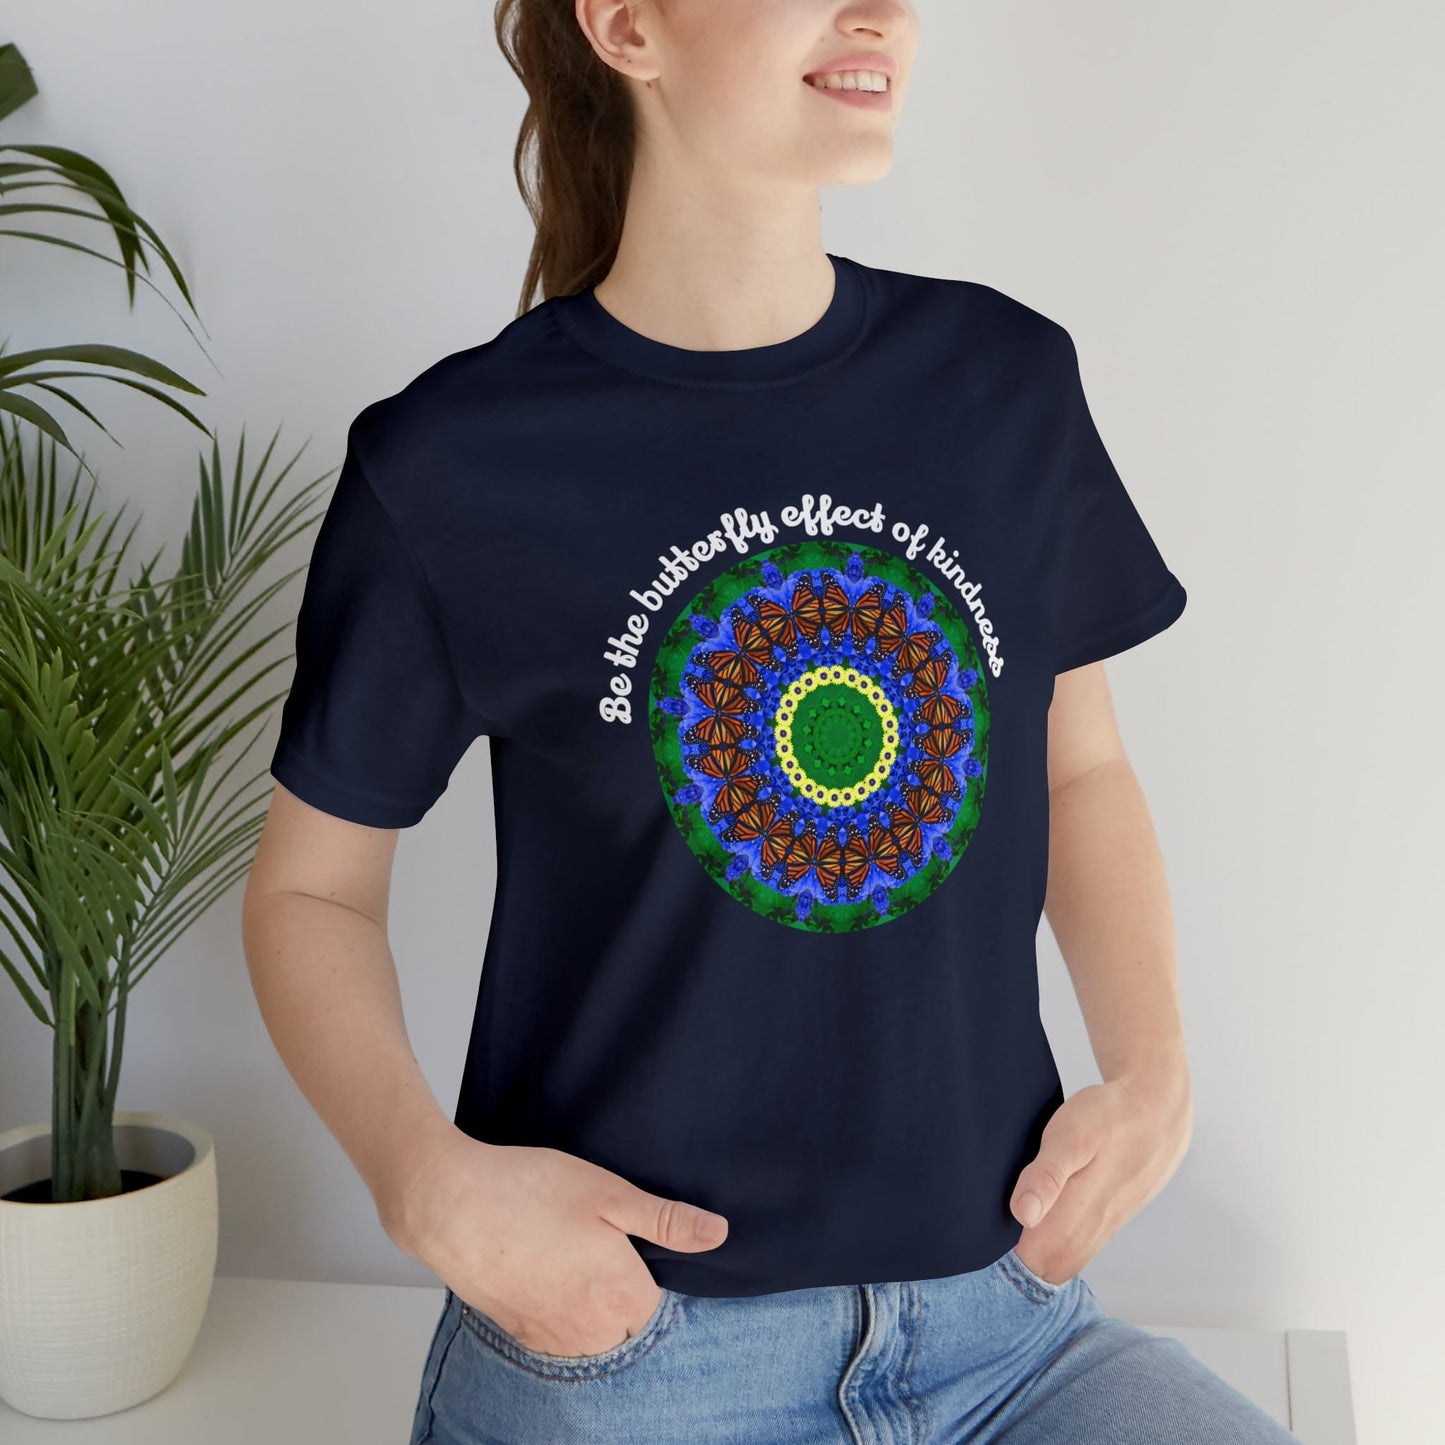 Cute Graphic Kindness Shirts  - Beautiful Monarch Butterfly Mandala Art For Positive Vibes – Butterfly Effect Navy Blue